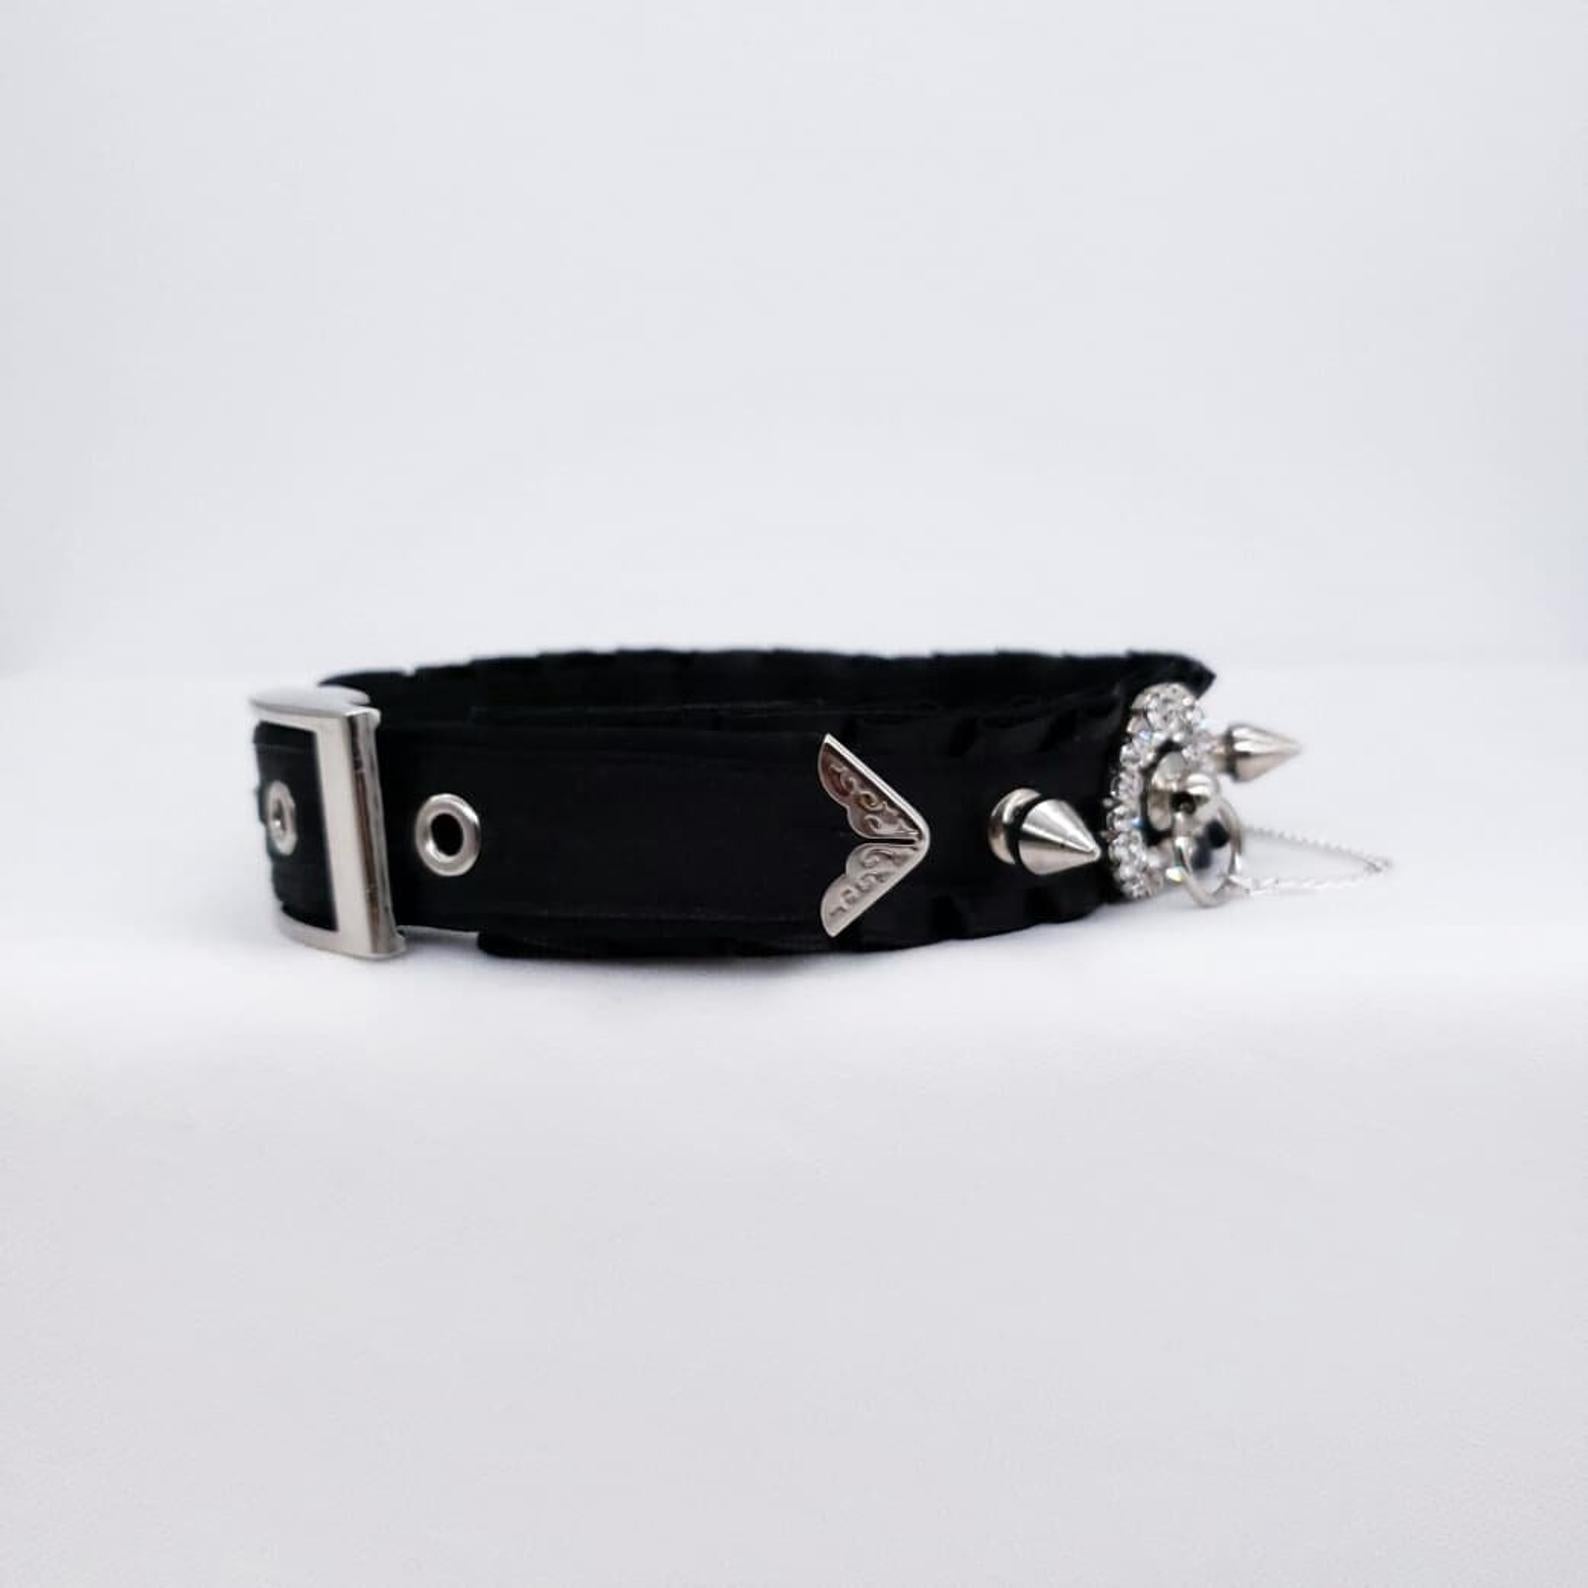 Black and Silver Spiked Sparkling Collar